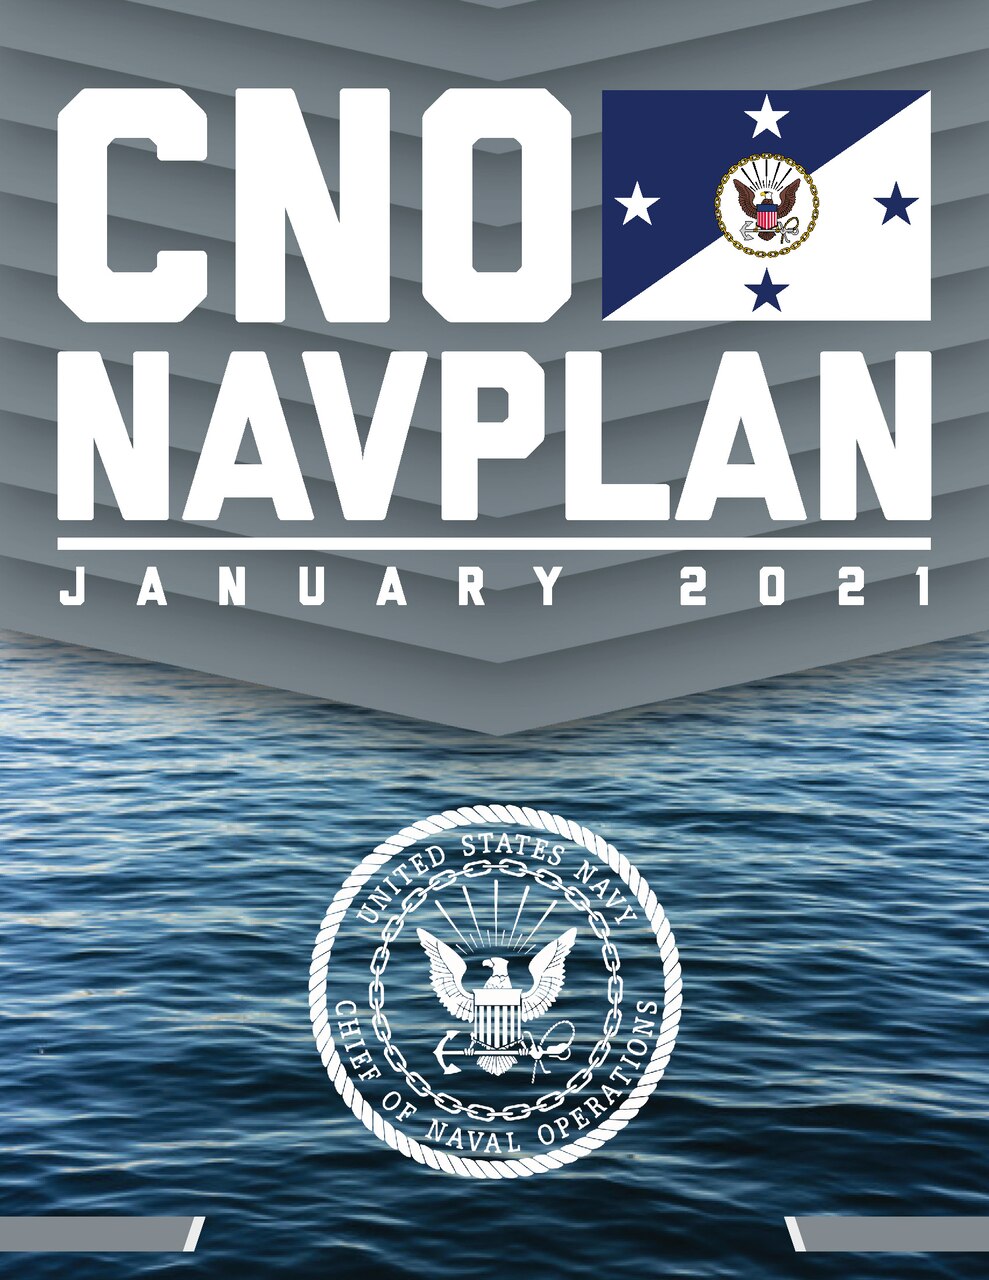 WASHINGTON (Jan. 11, 2021) Cover art created for the Chief of Naval Operations (CNO) Adm. Mike Gilday's Navigation Plan (NAVPLAN) 2021. (U.S. Navy graphic by Mass Communication Specialist 1st Class Raymond D. Diaz III/Released)